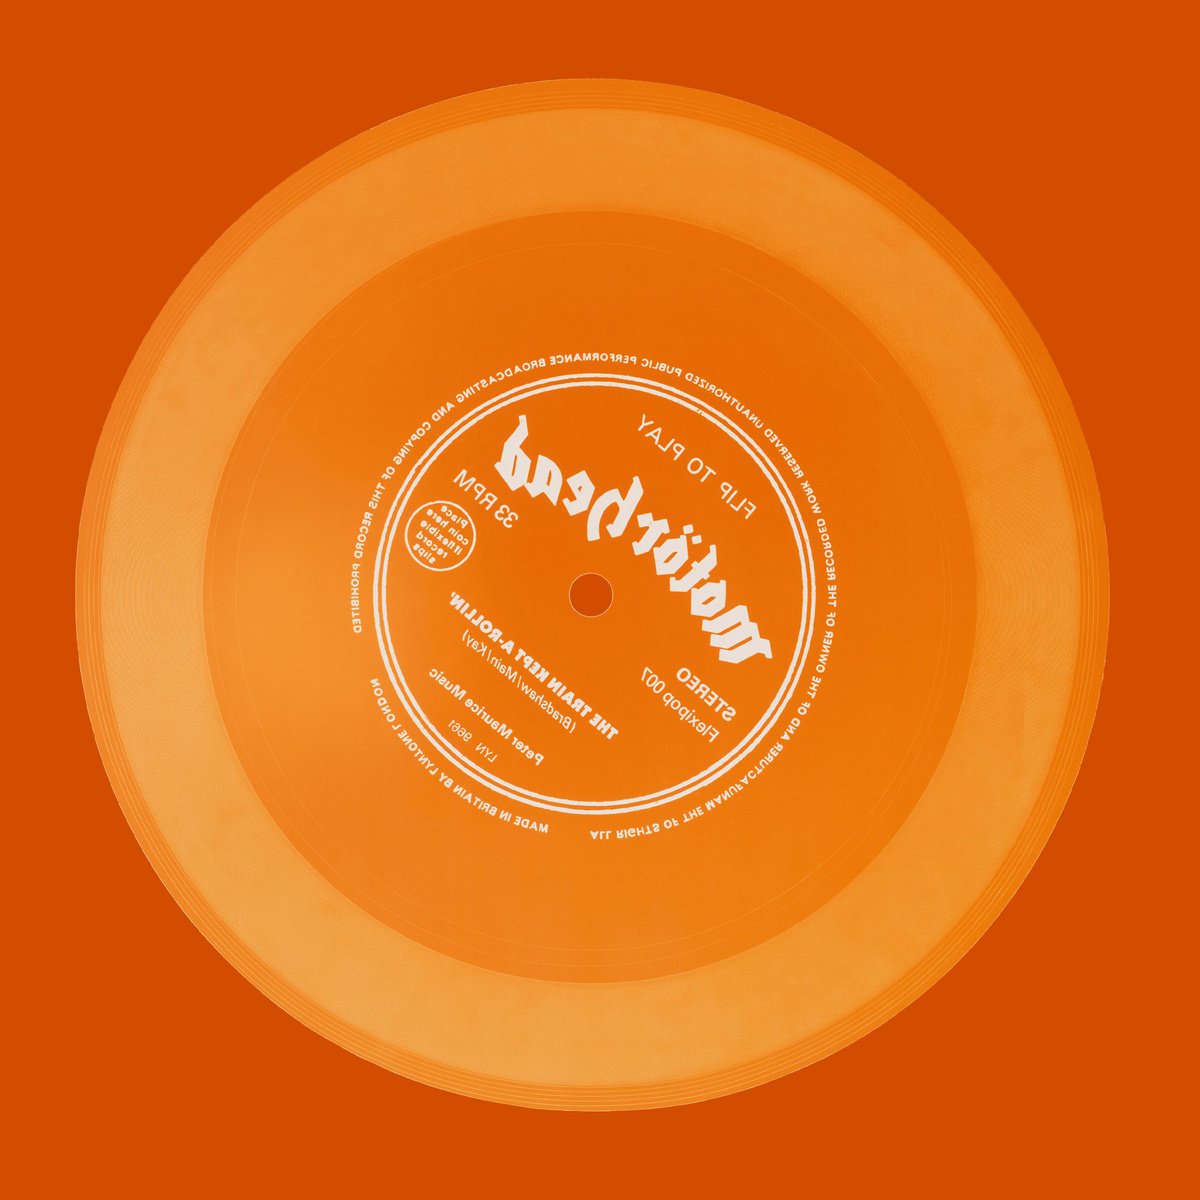 Vinyl Collection ’Flip to Play (Orange)’ by Richard Heeps